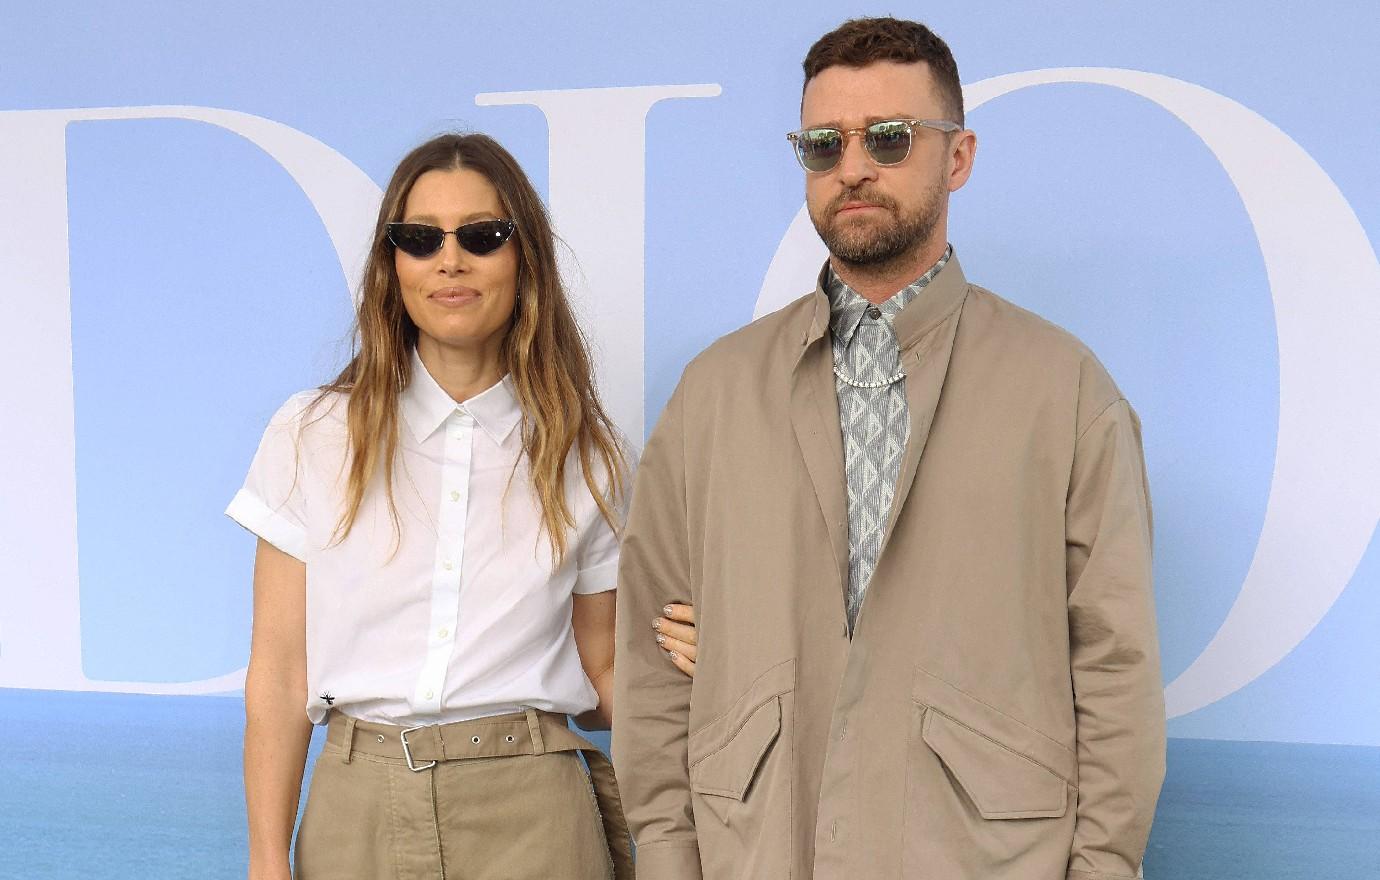 Justin Timberlake leaves risque comment on wife Jessica Biel's